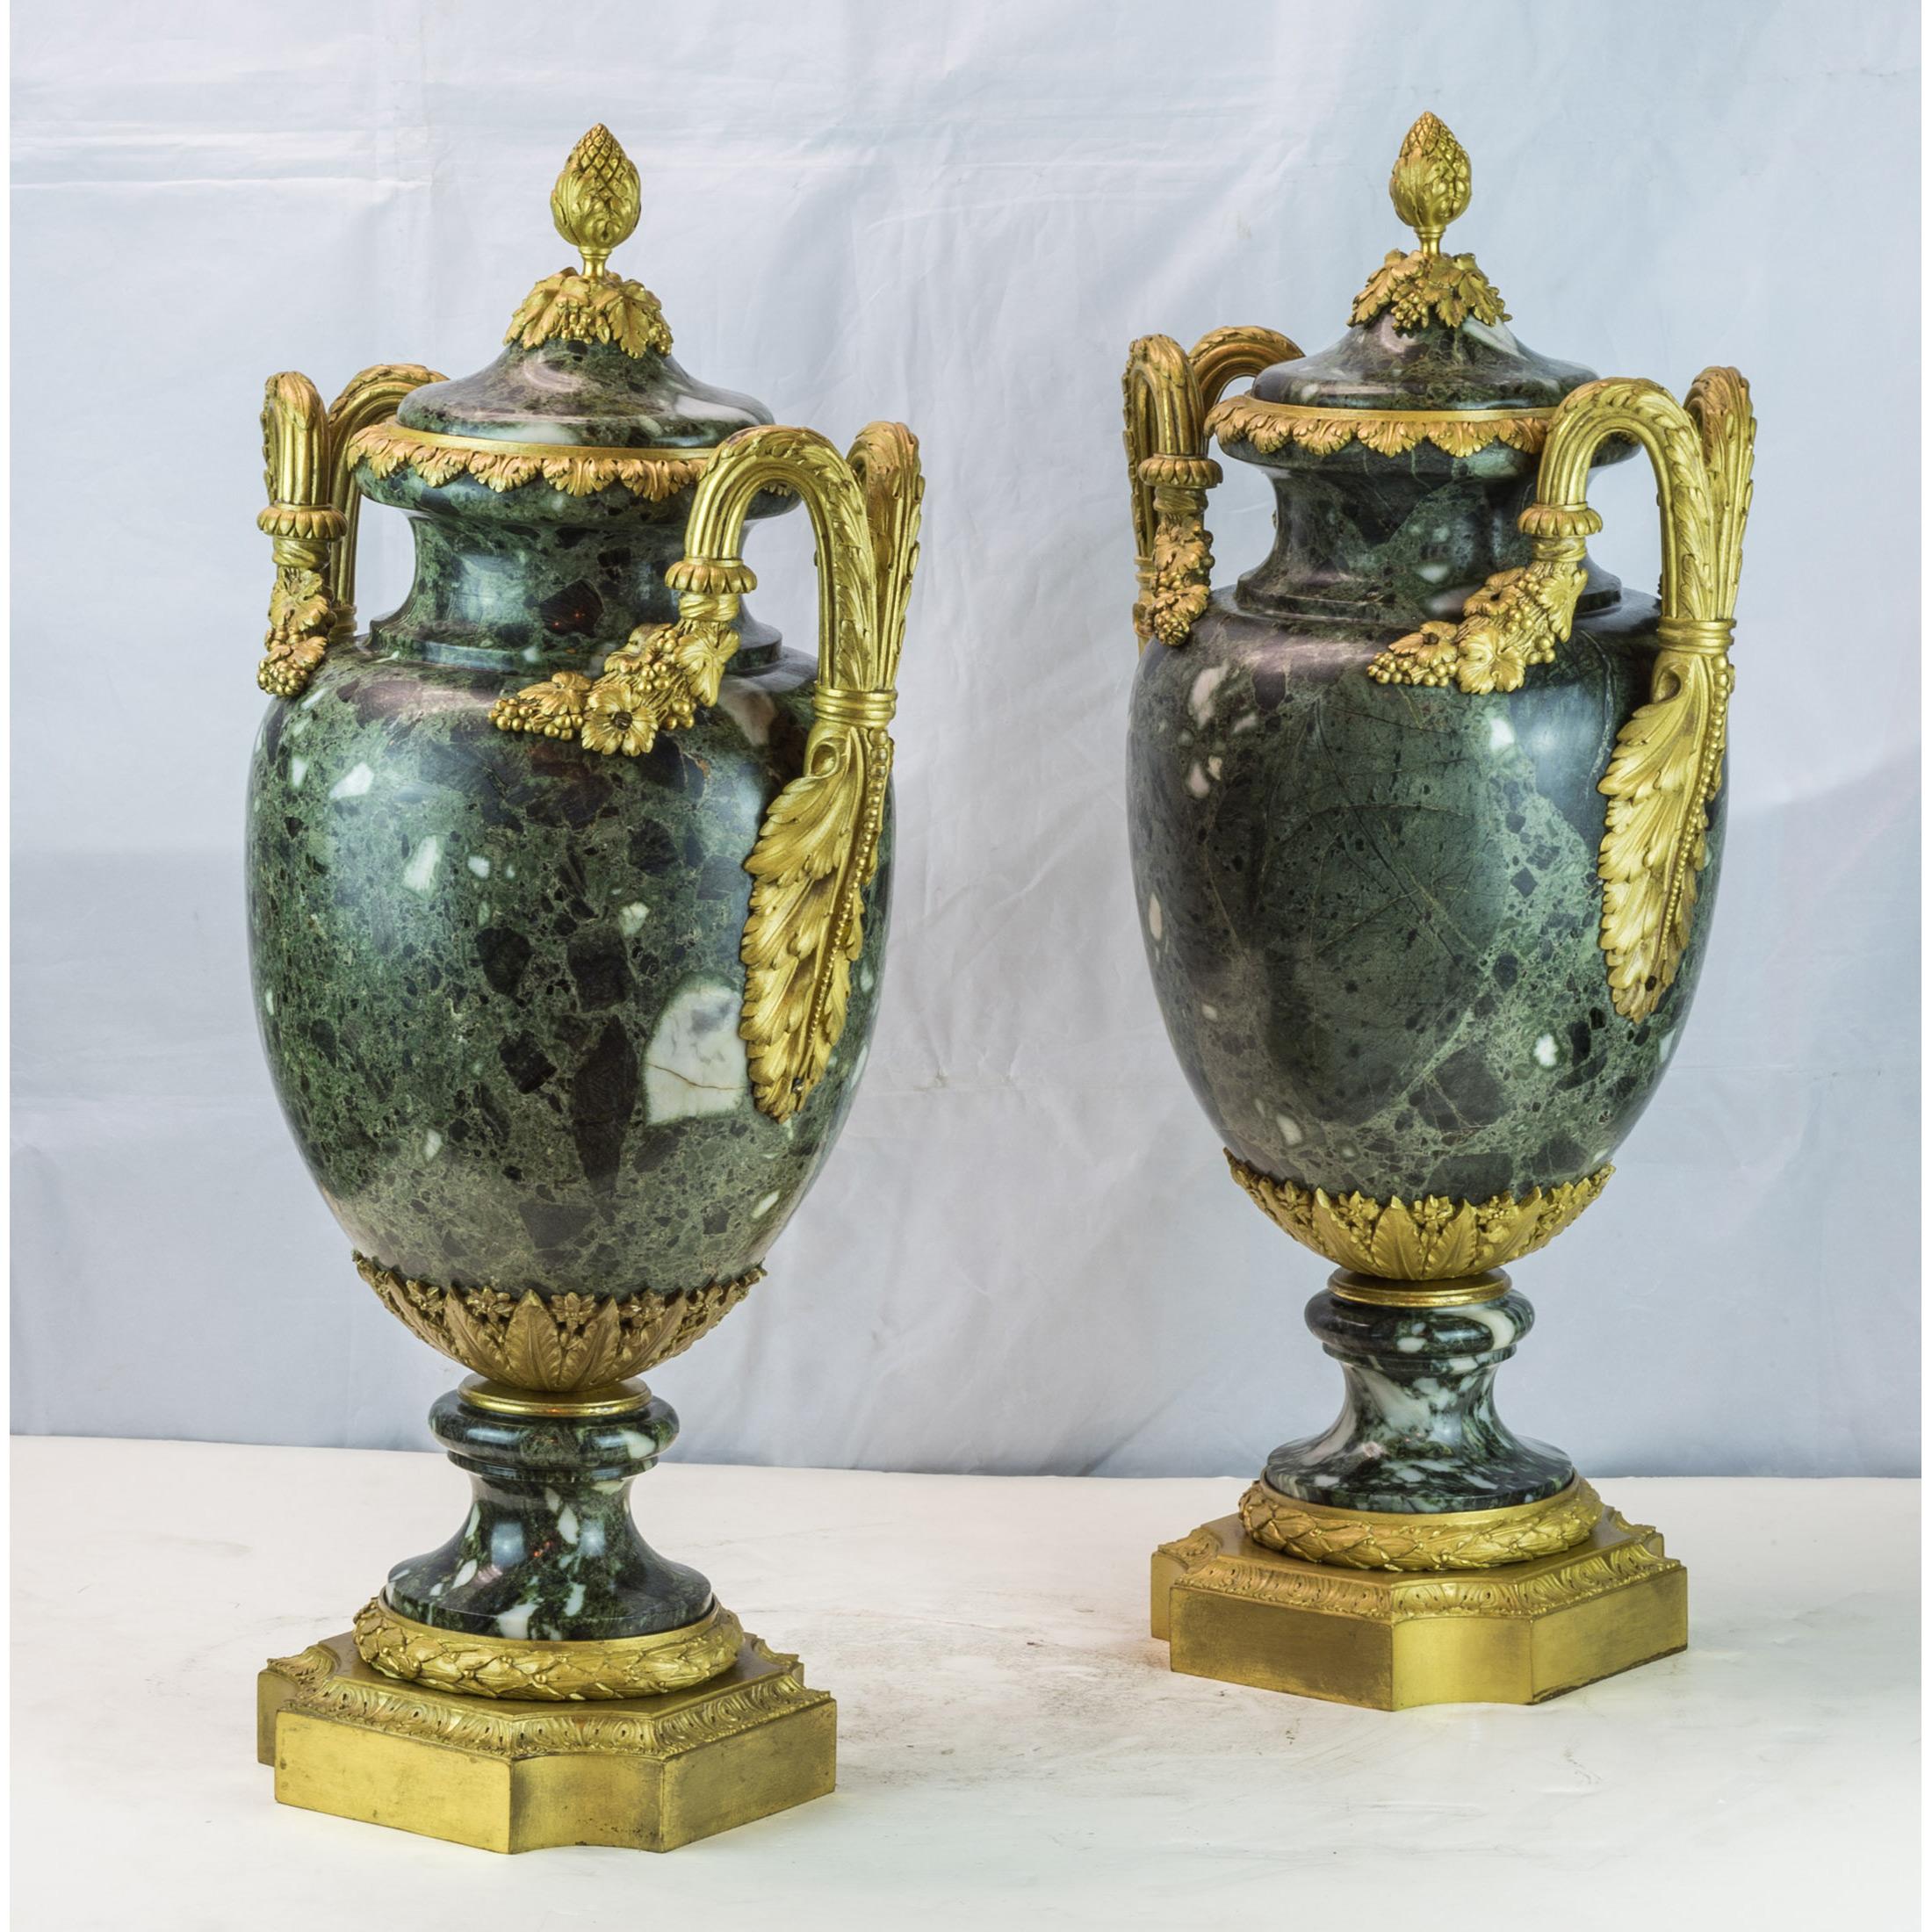 A Fine Pair of Antique  green marble and gilt-bronze mounted vases in   Louis XVI Style .
Date: circa 1880
Dimension: 22 in x 11 in.